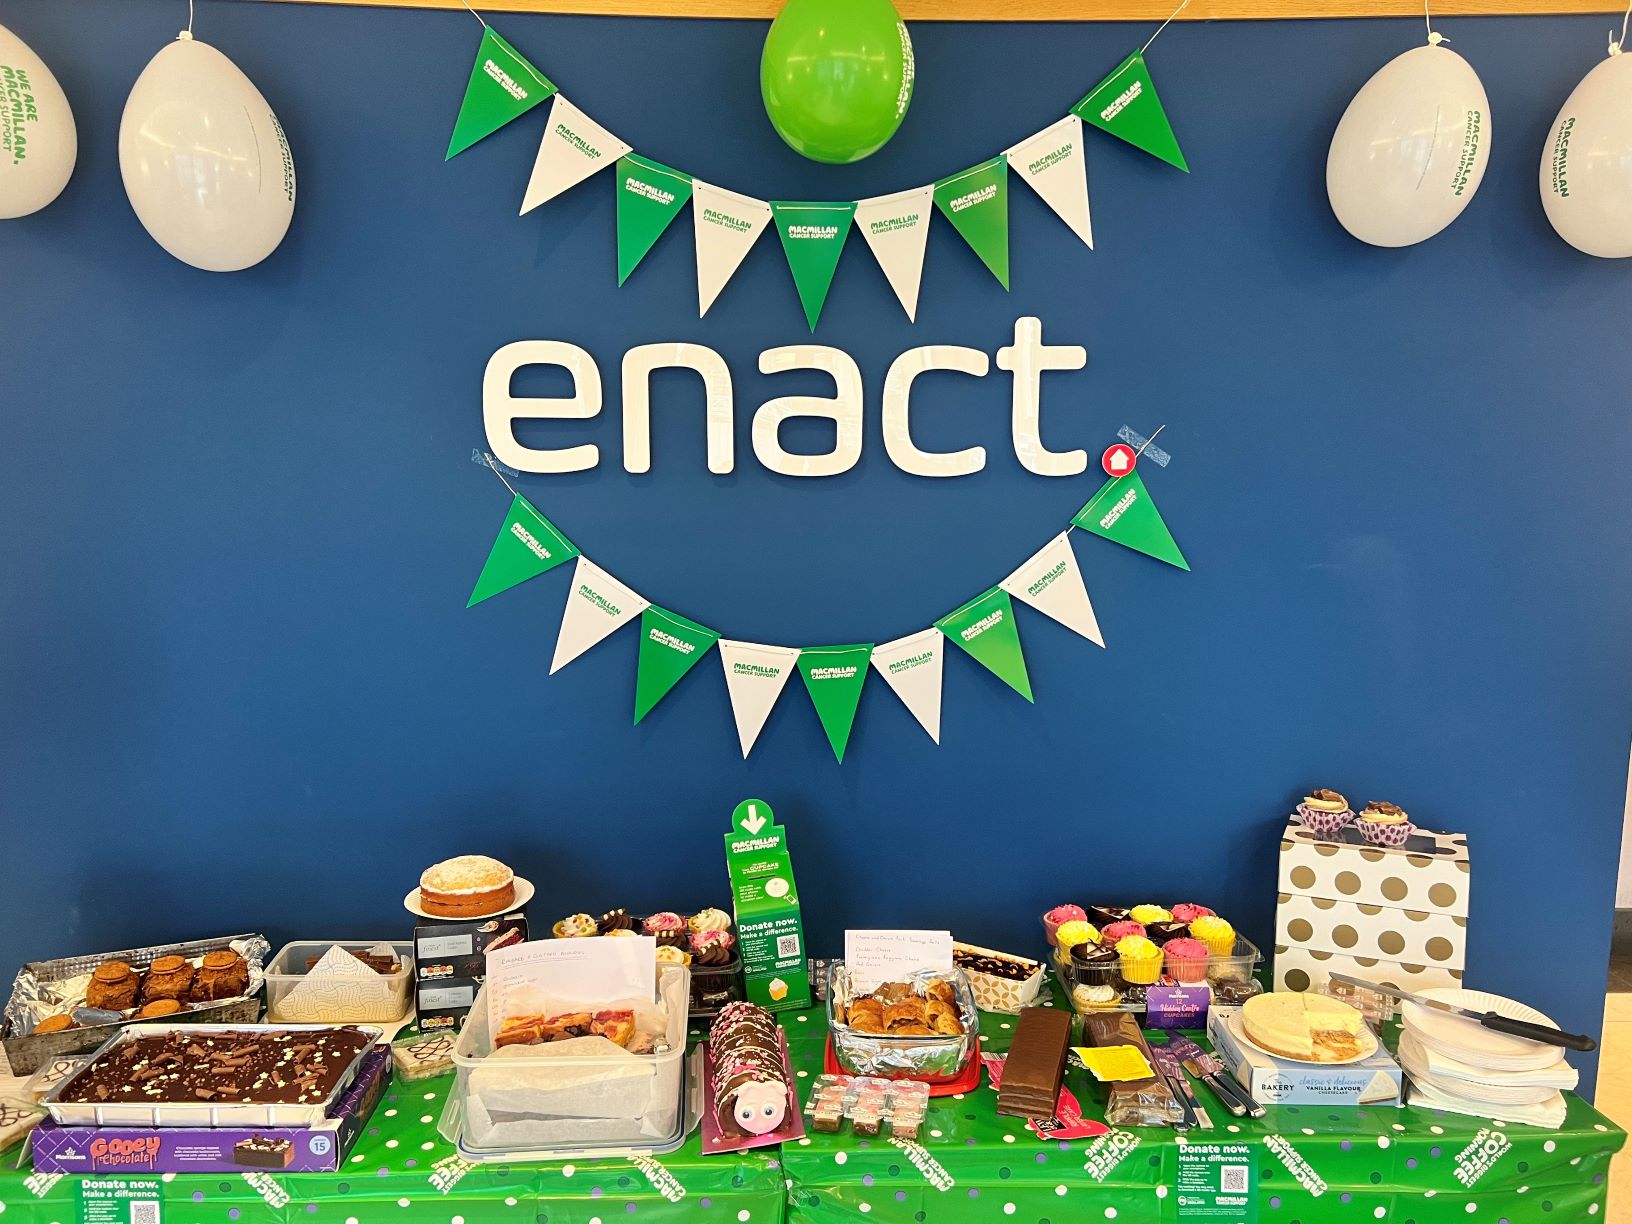 enact logo and cake table